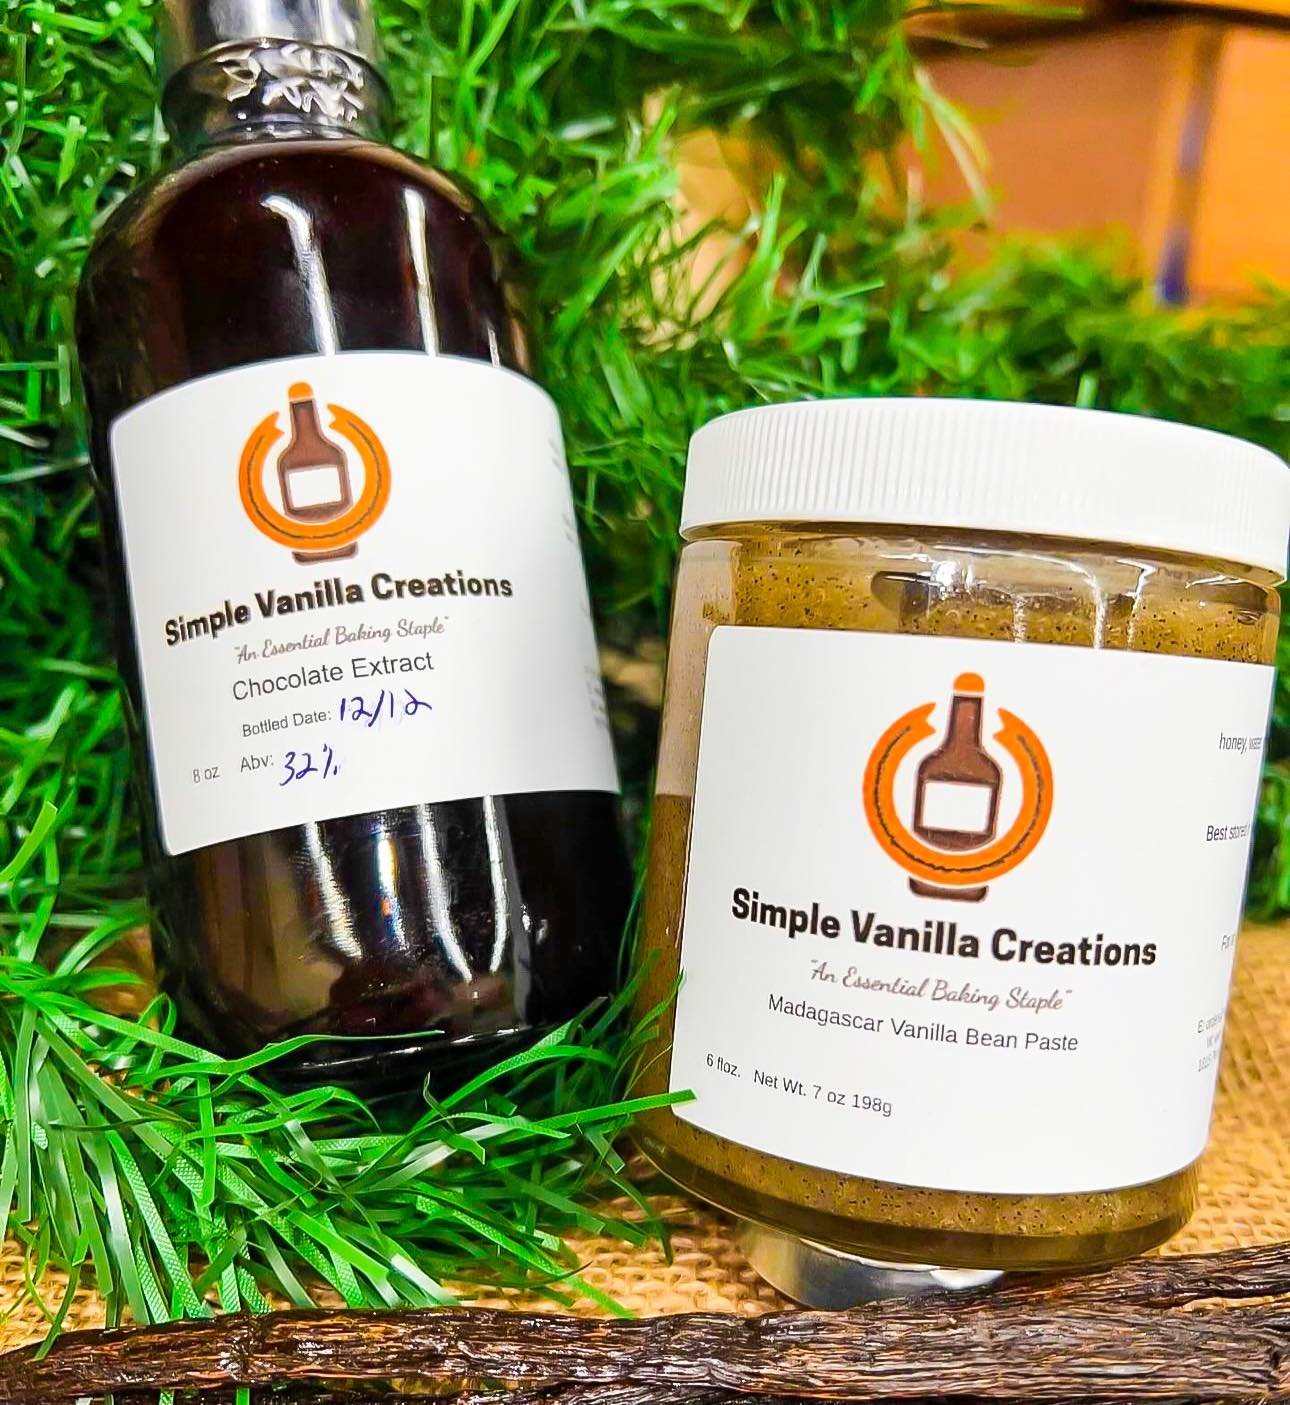 NEW VENDOR 🚨
Simple Vanilla Creations will be bringing some delicious vanilla crafted cooking products ✨✨✨
&bull;
#westsidemarketcincy #shoplocal #supportsmallbusiness